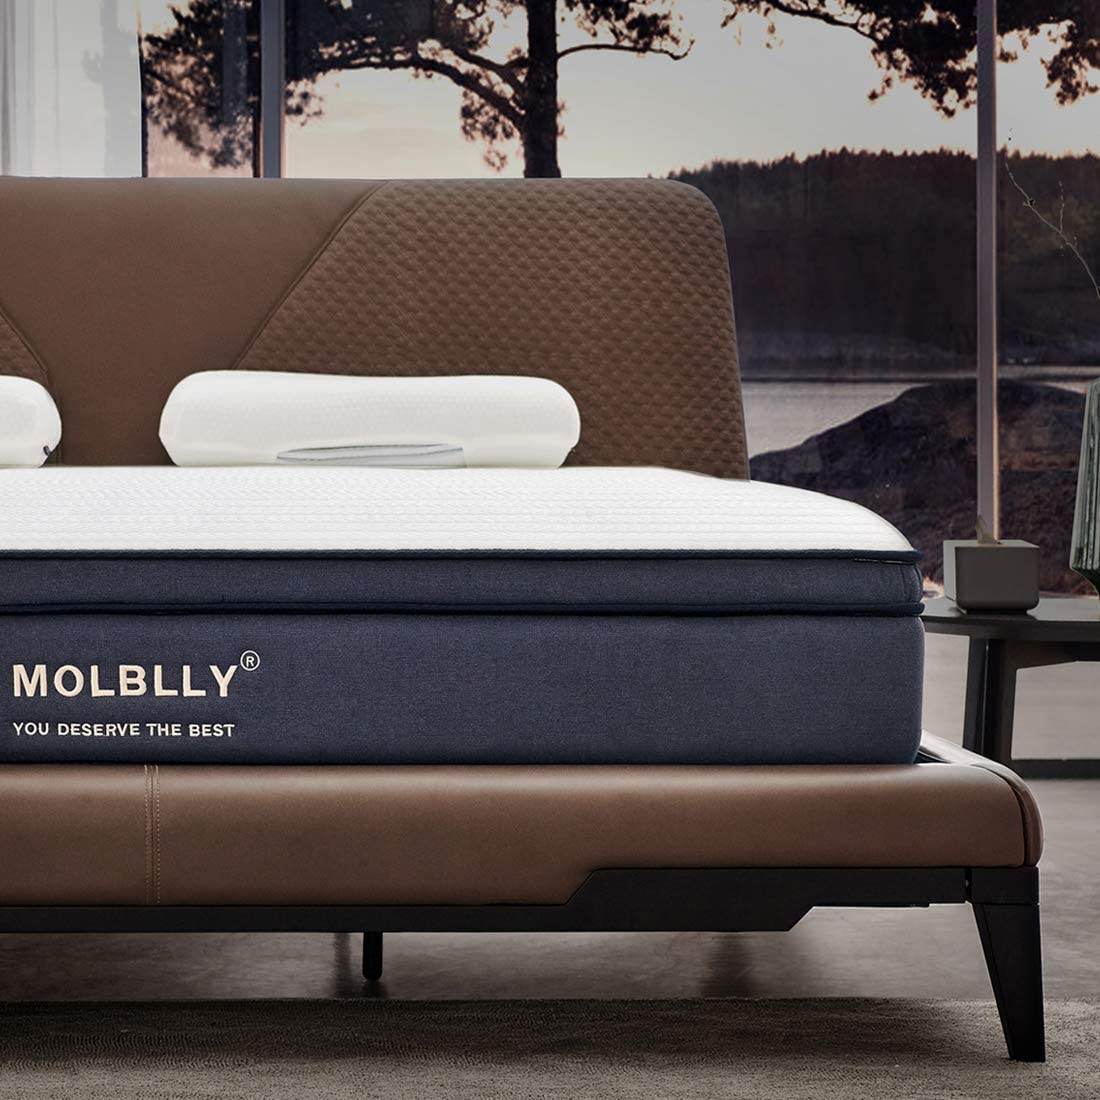 Molblly Pressure Relief Full Innerspring Mattress